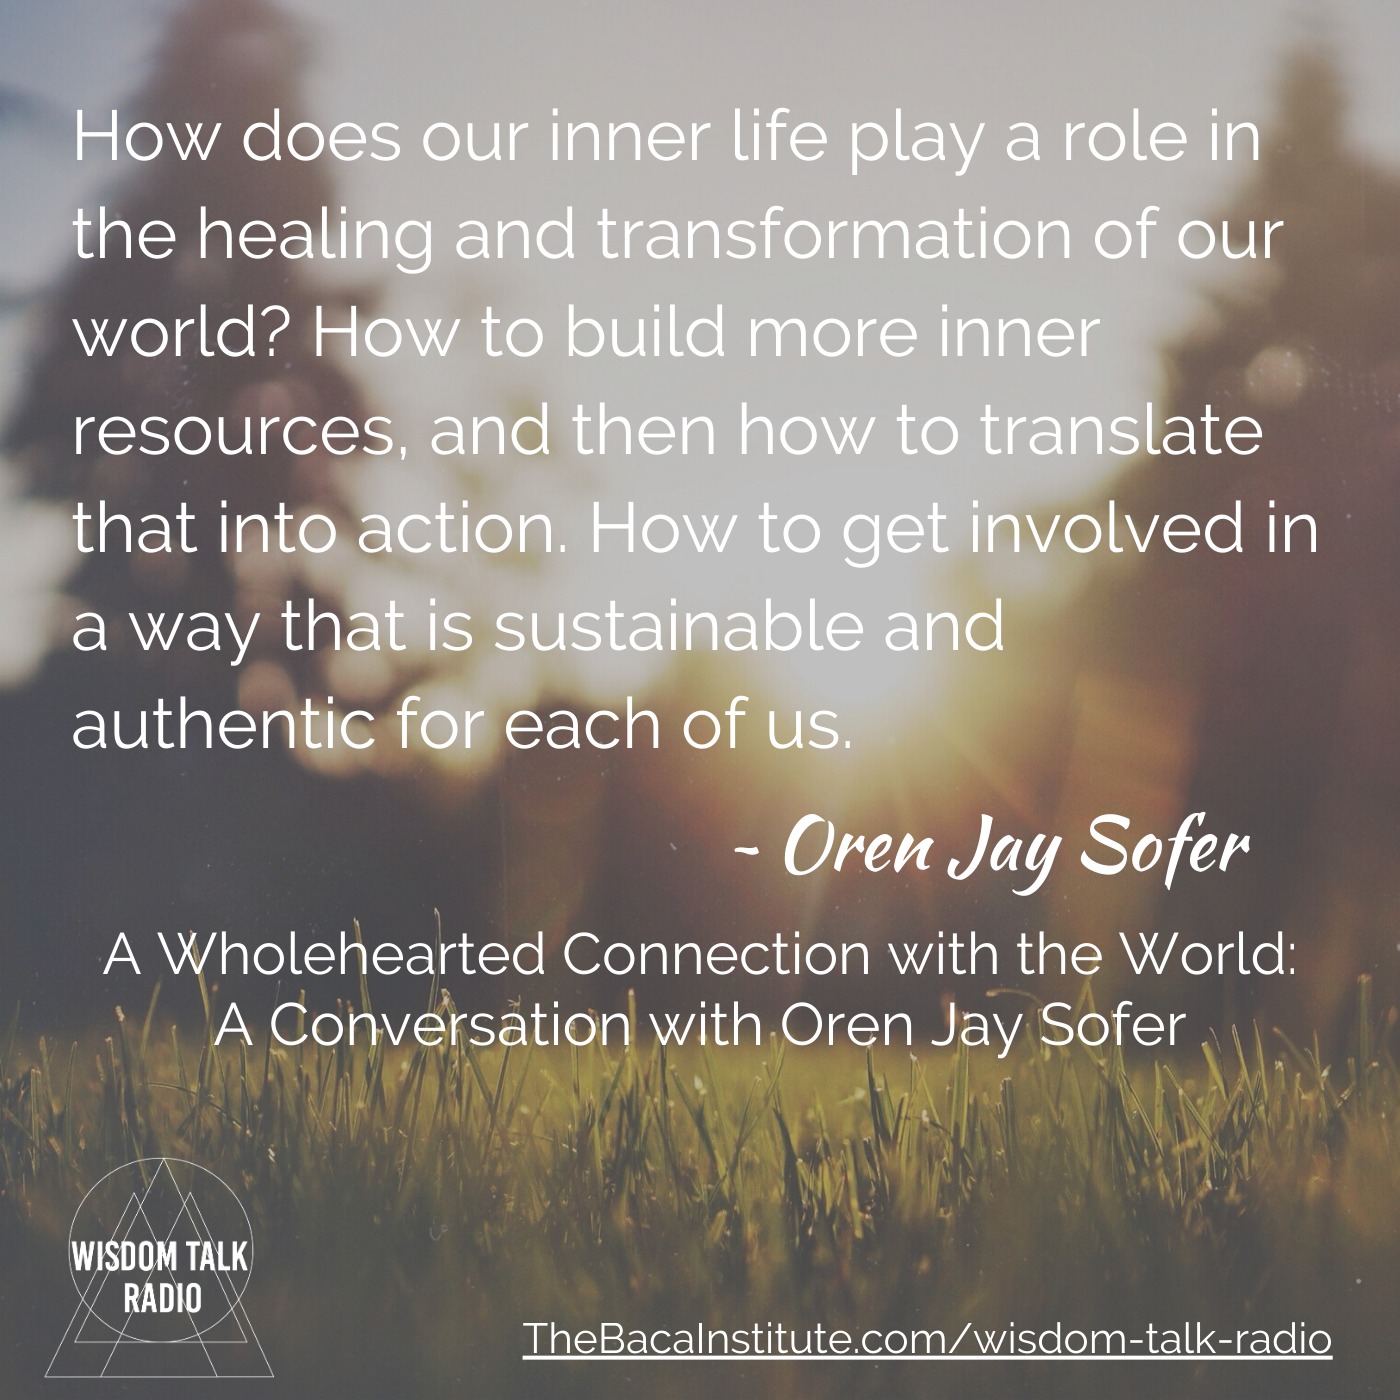 A Wholehearted Connection with the World: a Conversation with Oren Jay Sofer